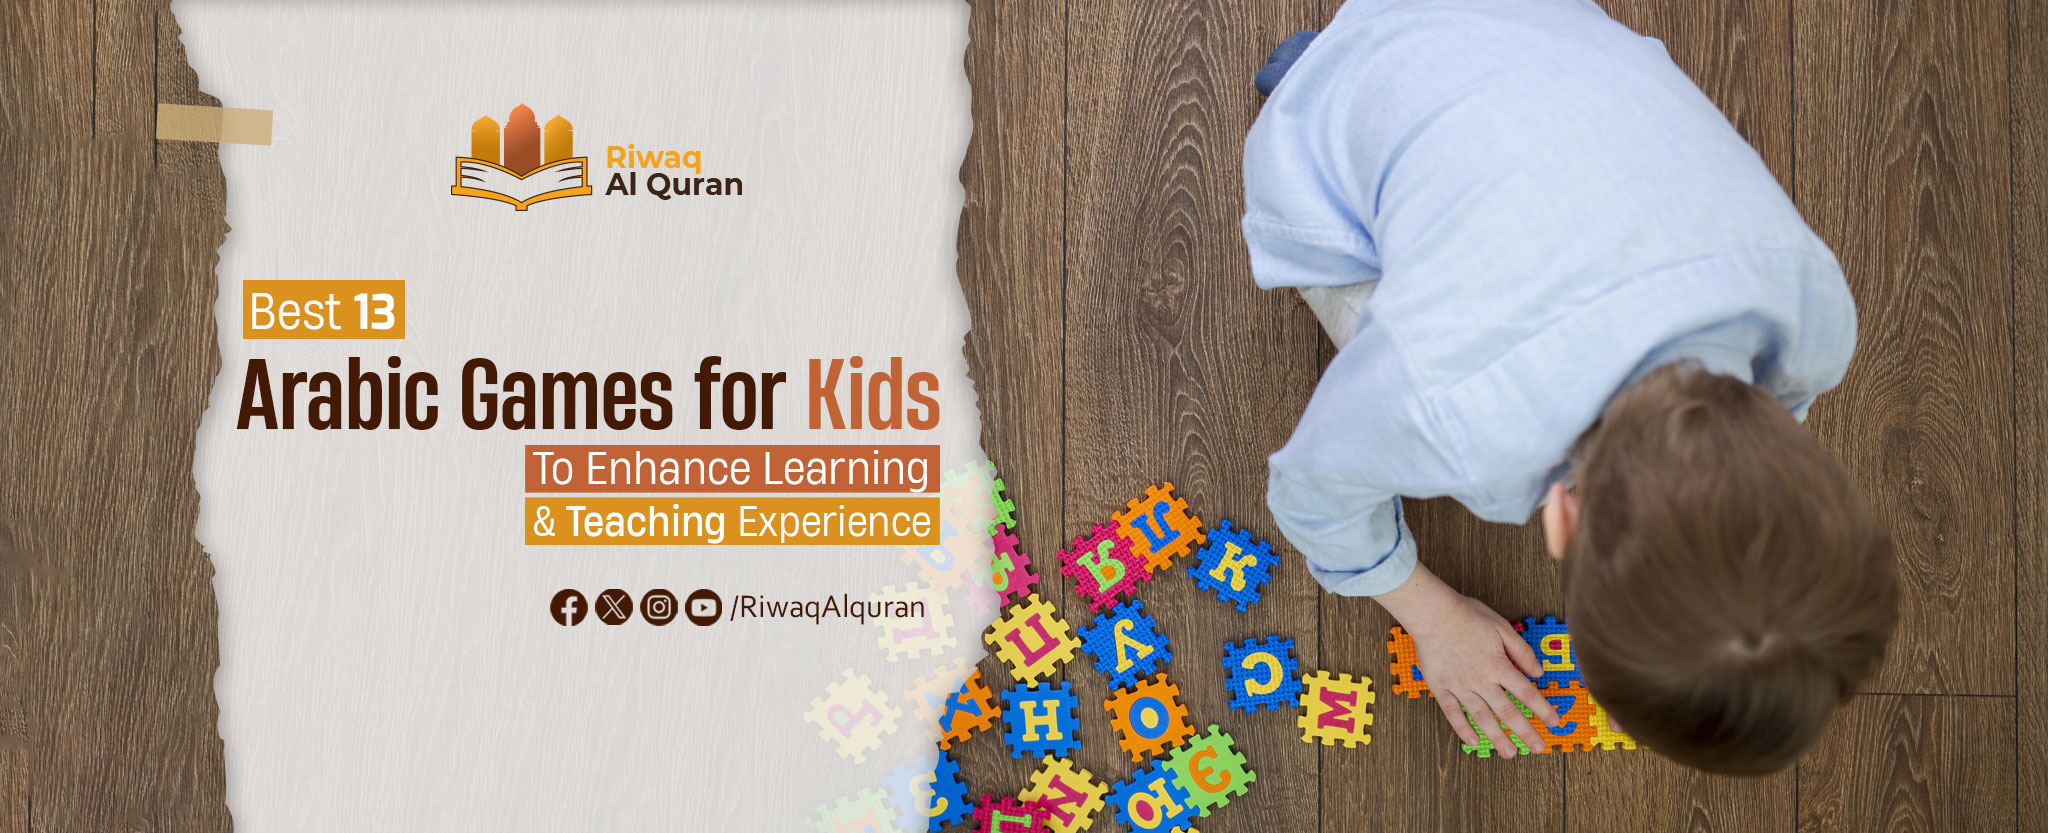 Best 13 Arabic Games for Kids to Enhance Learning & Teaching Experience